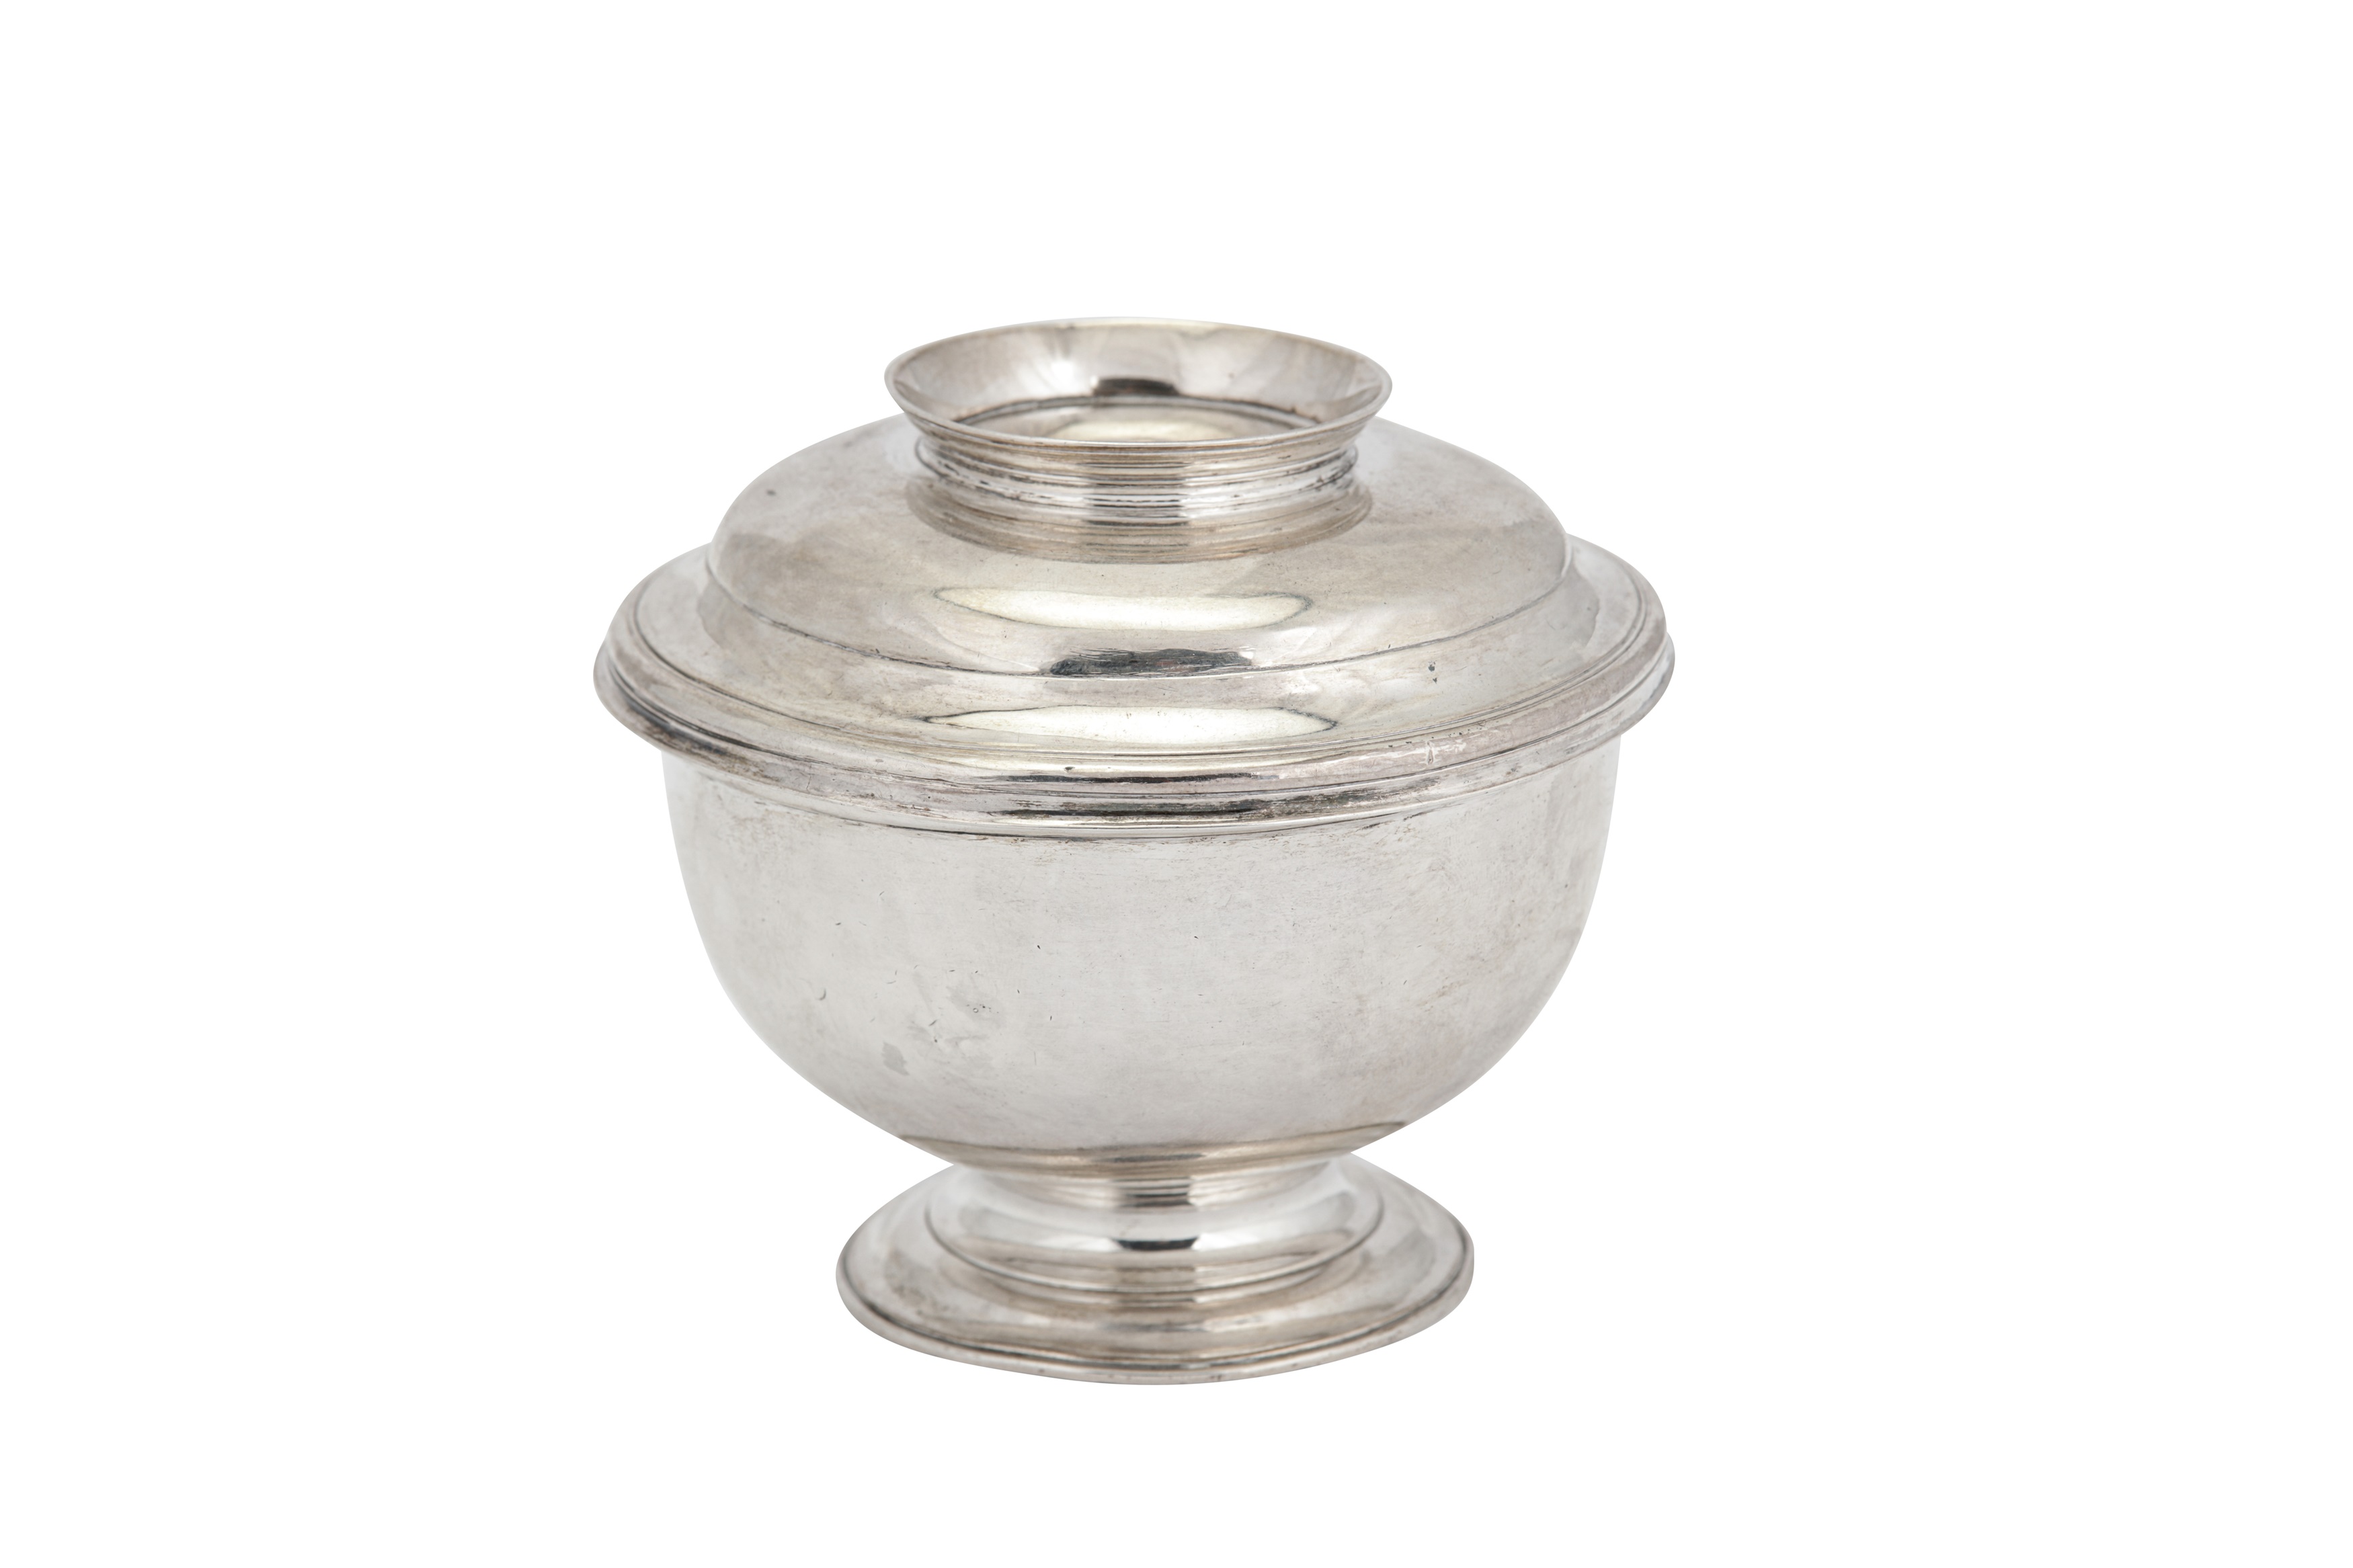 An early George II sterling silver covered sugar bowl, London 1728 by John Gamon (reg. 22nd March - Image 4 of 4